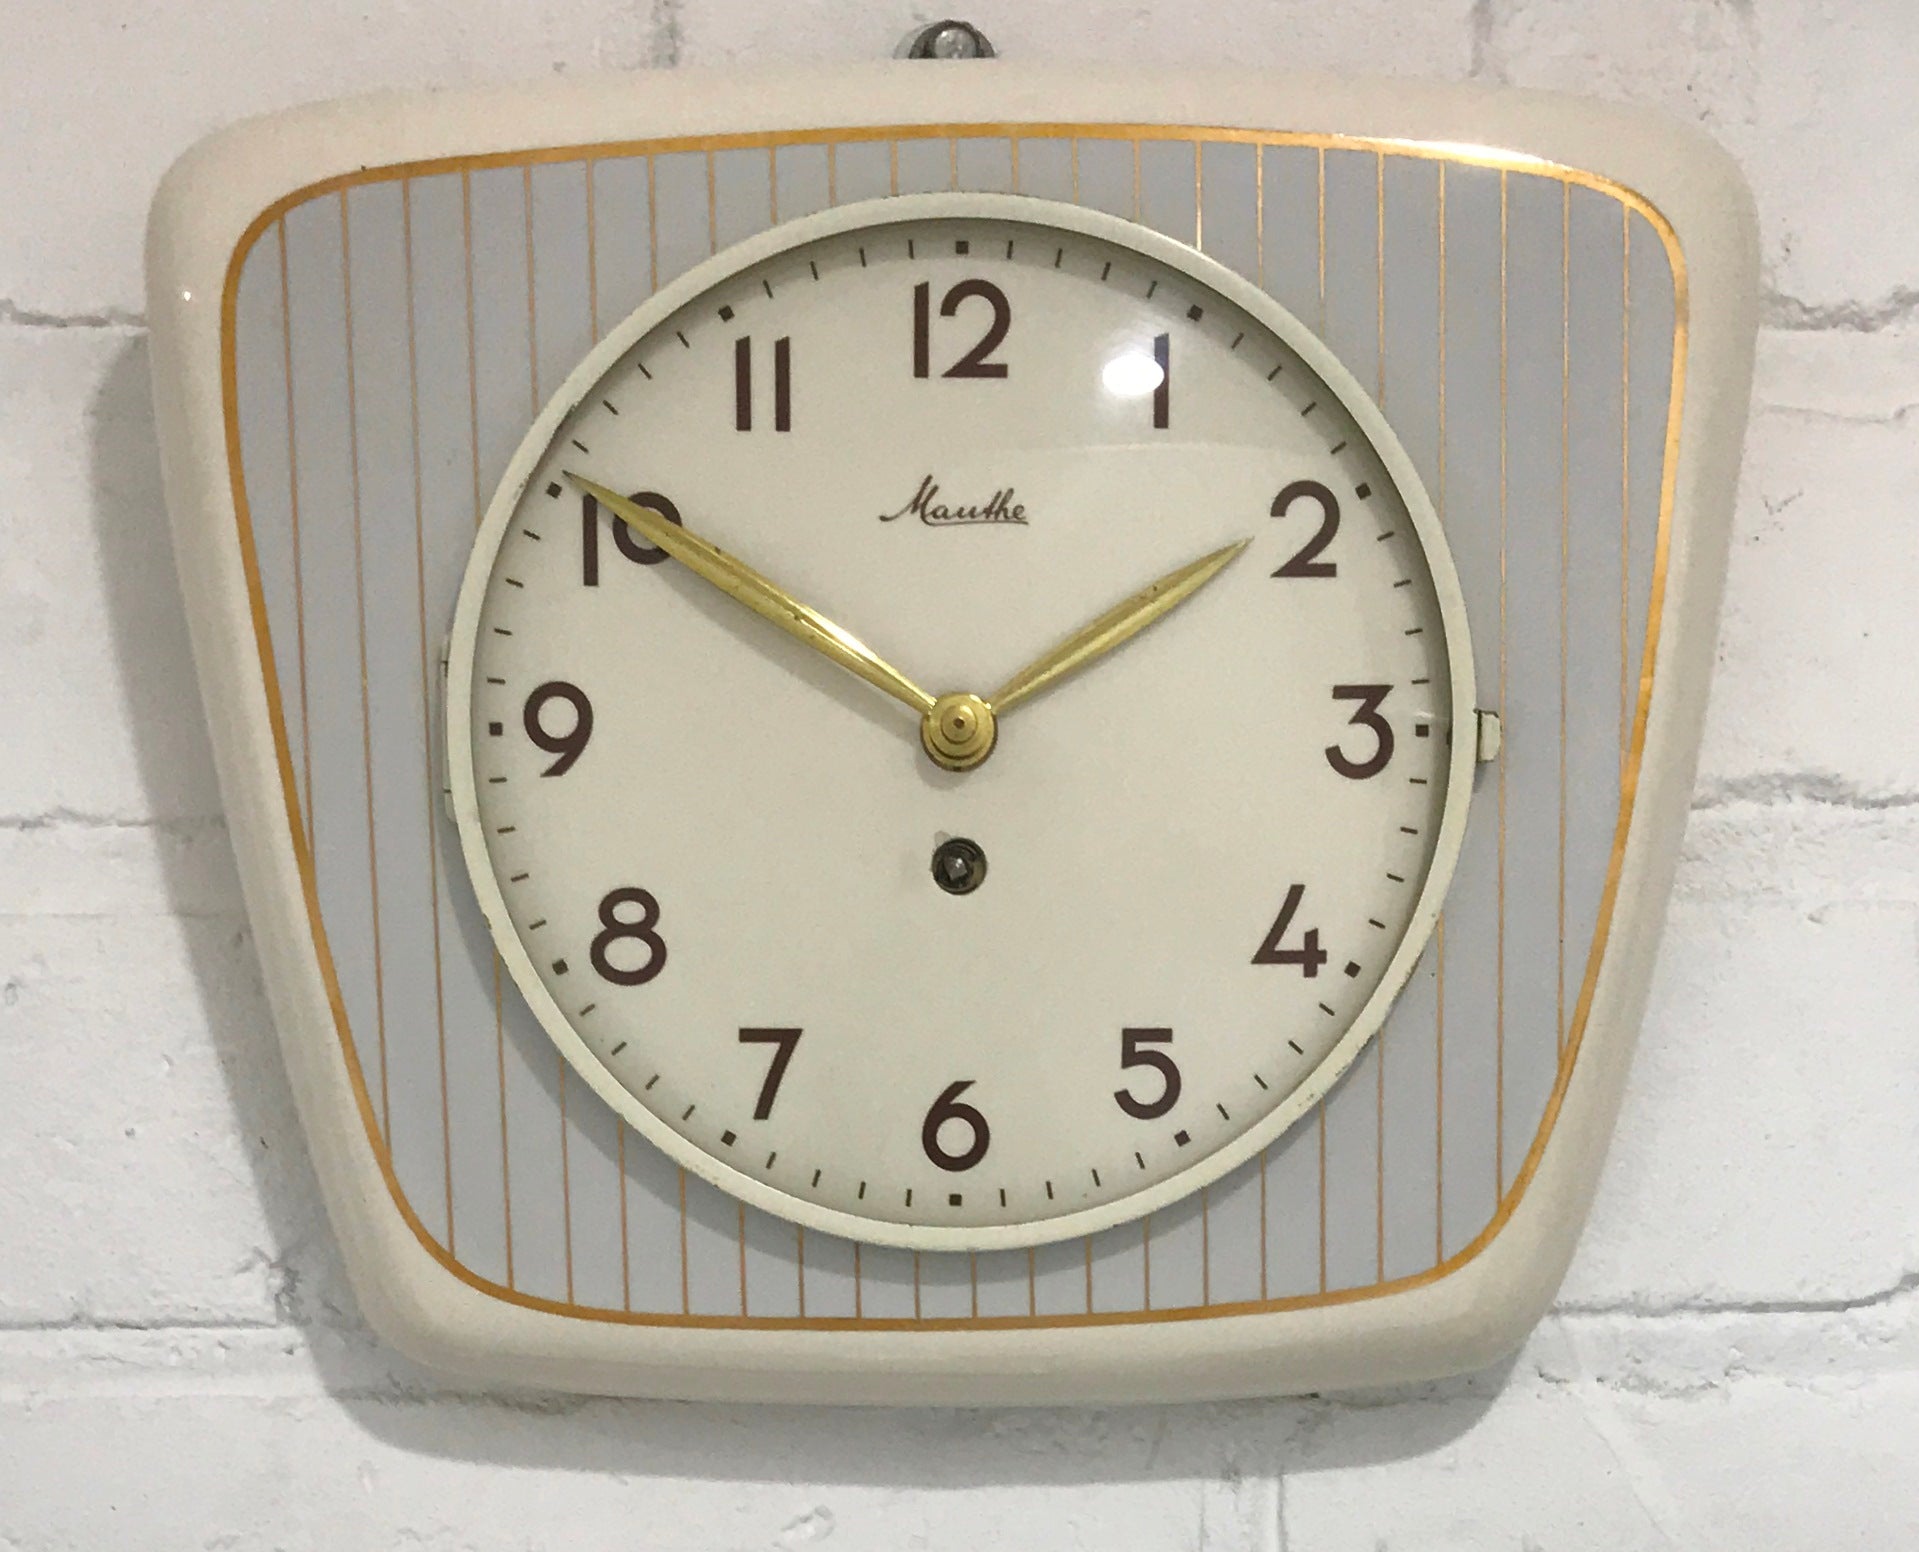 Vintage MAUTHE Ceramic Wall Clock | eXibit collection